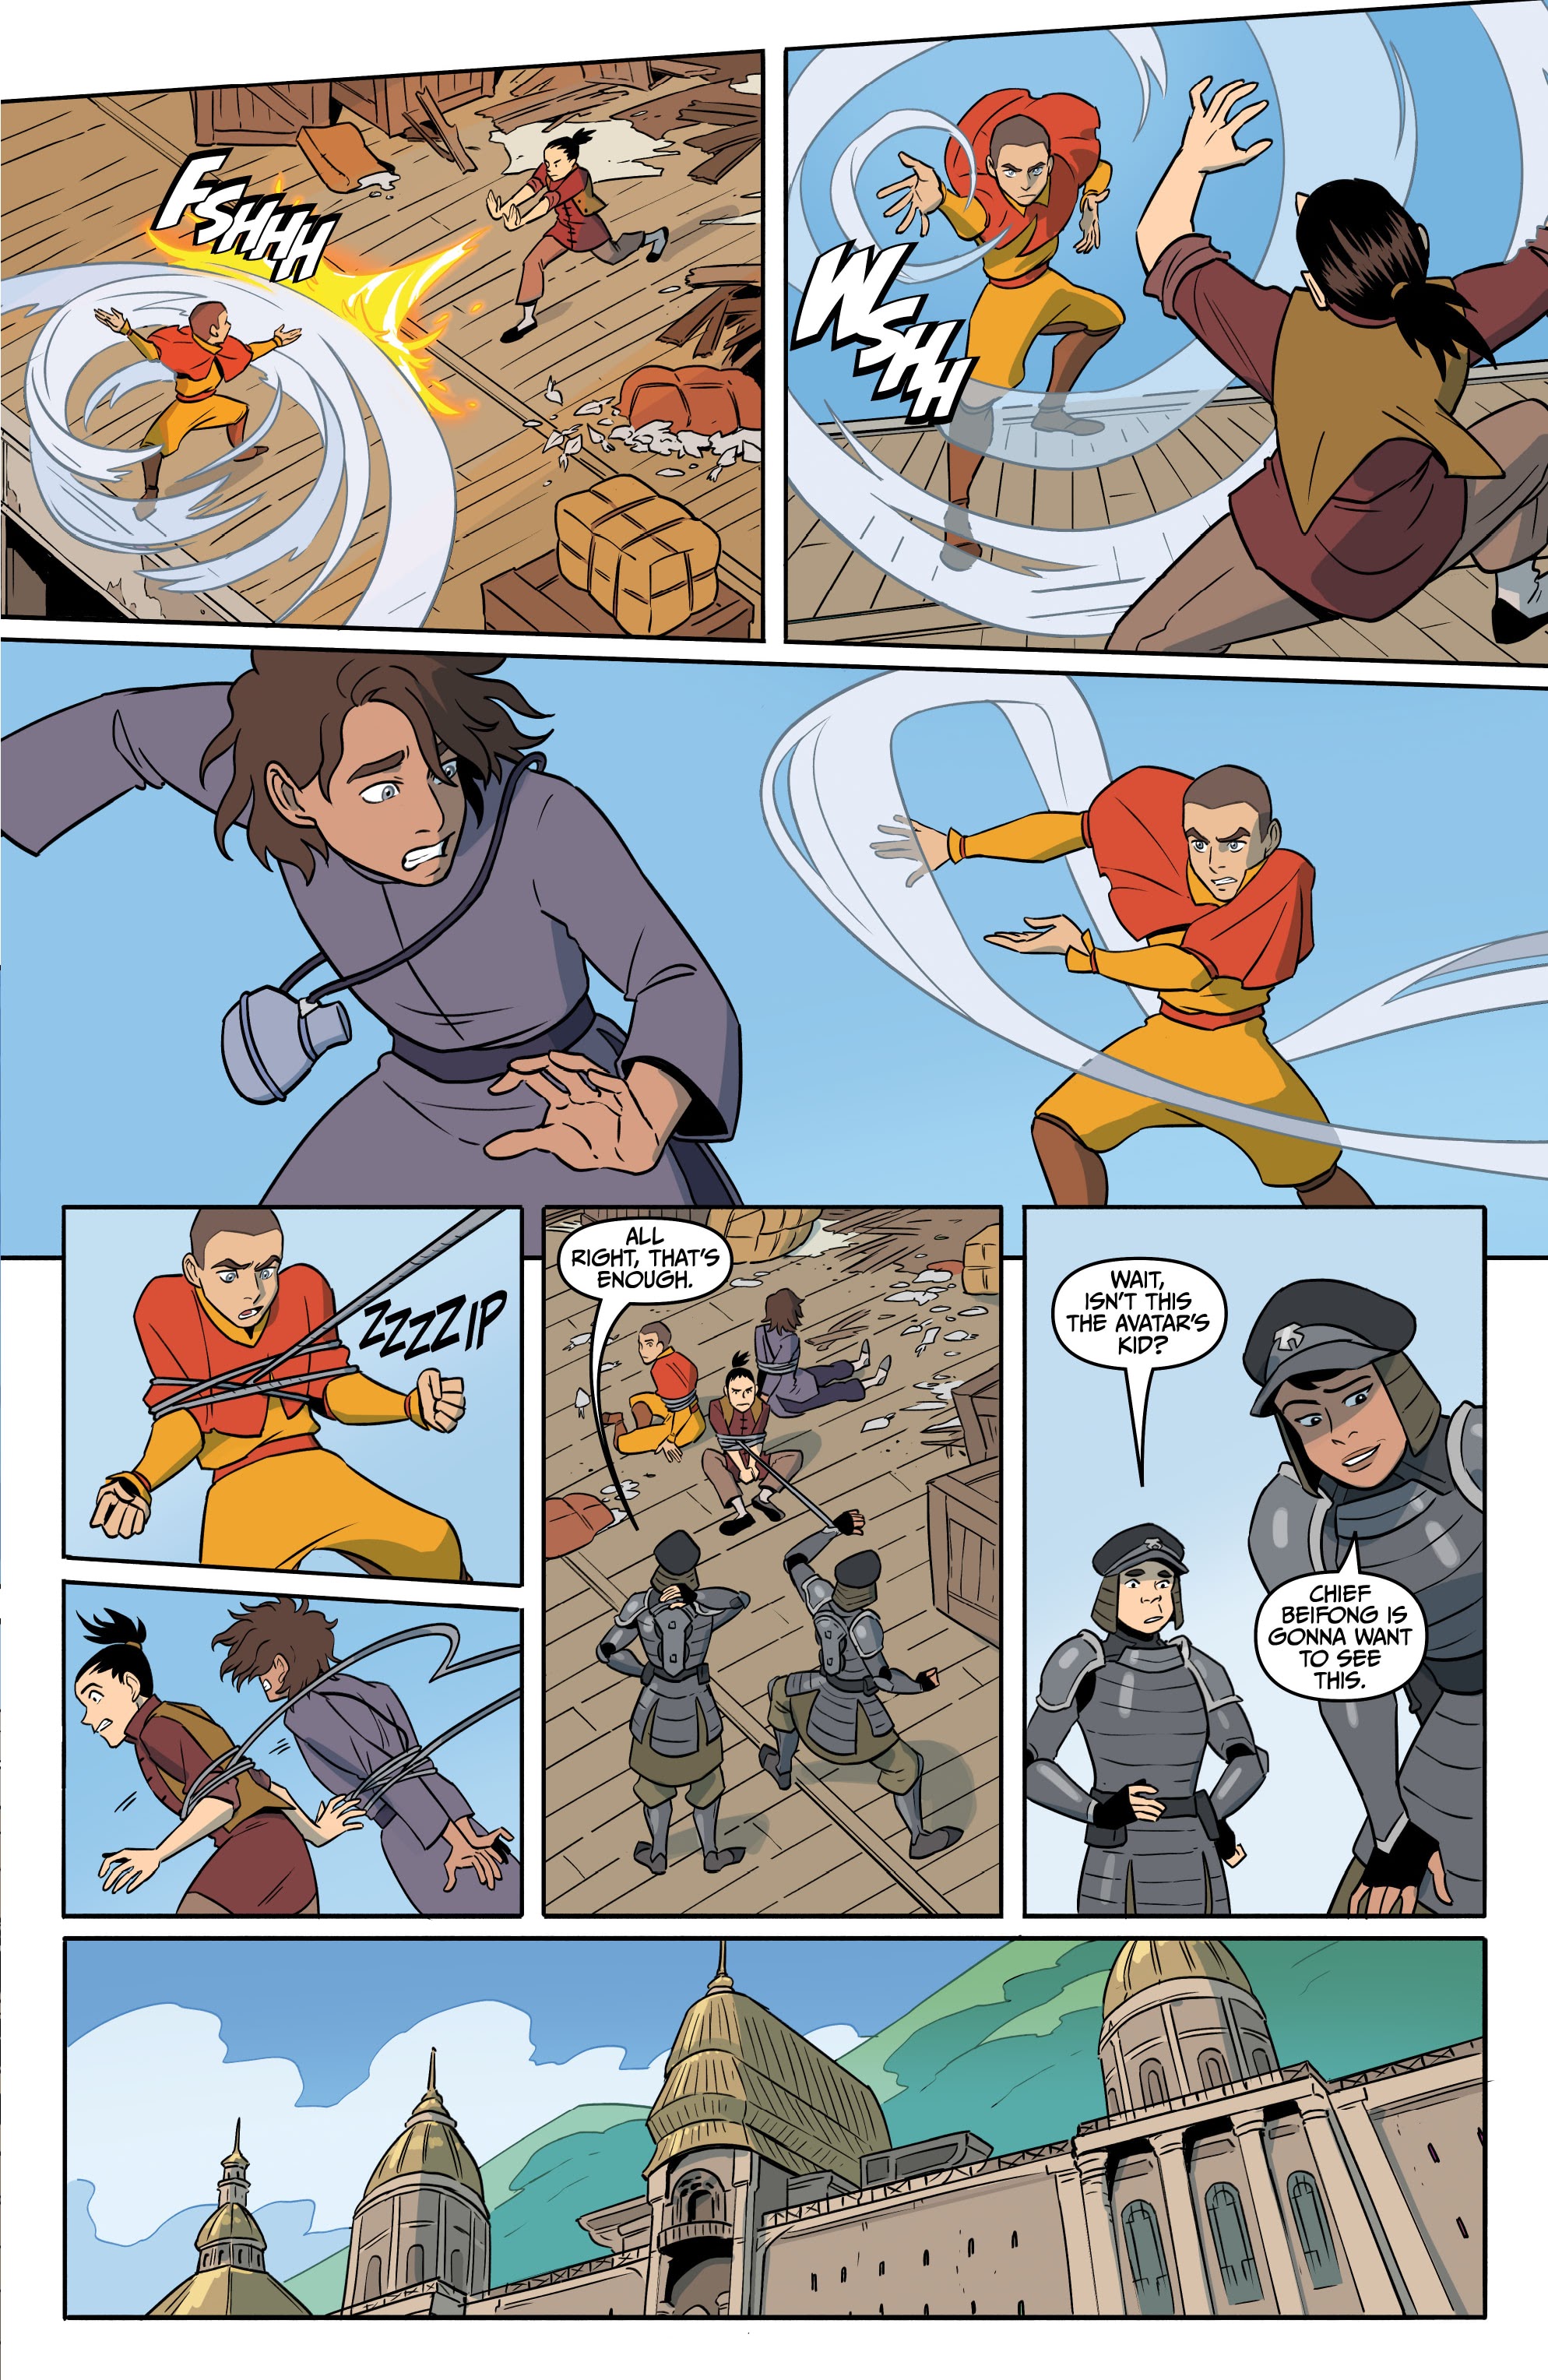 Read online Free Comic Book Day 2021 comic -  Issue # Avatar - The Last Airbender - The Legend of Korra - 7